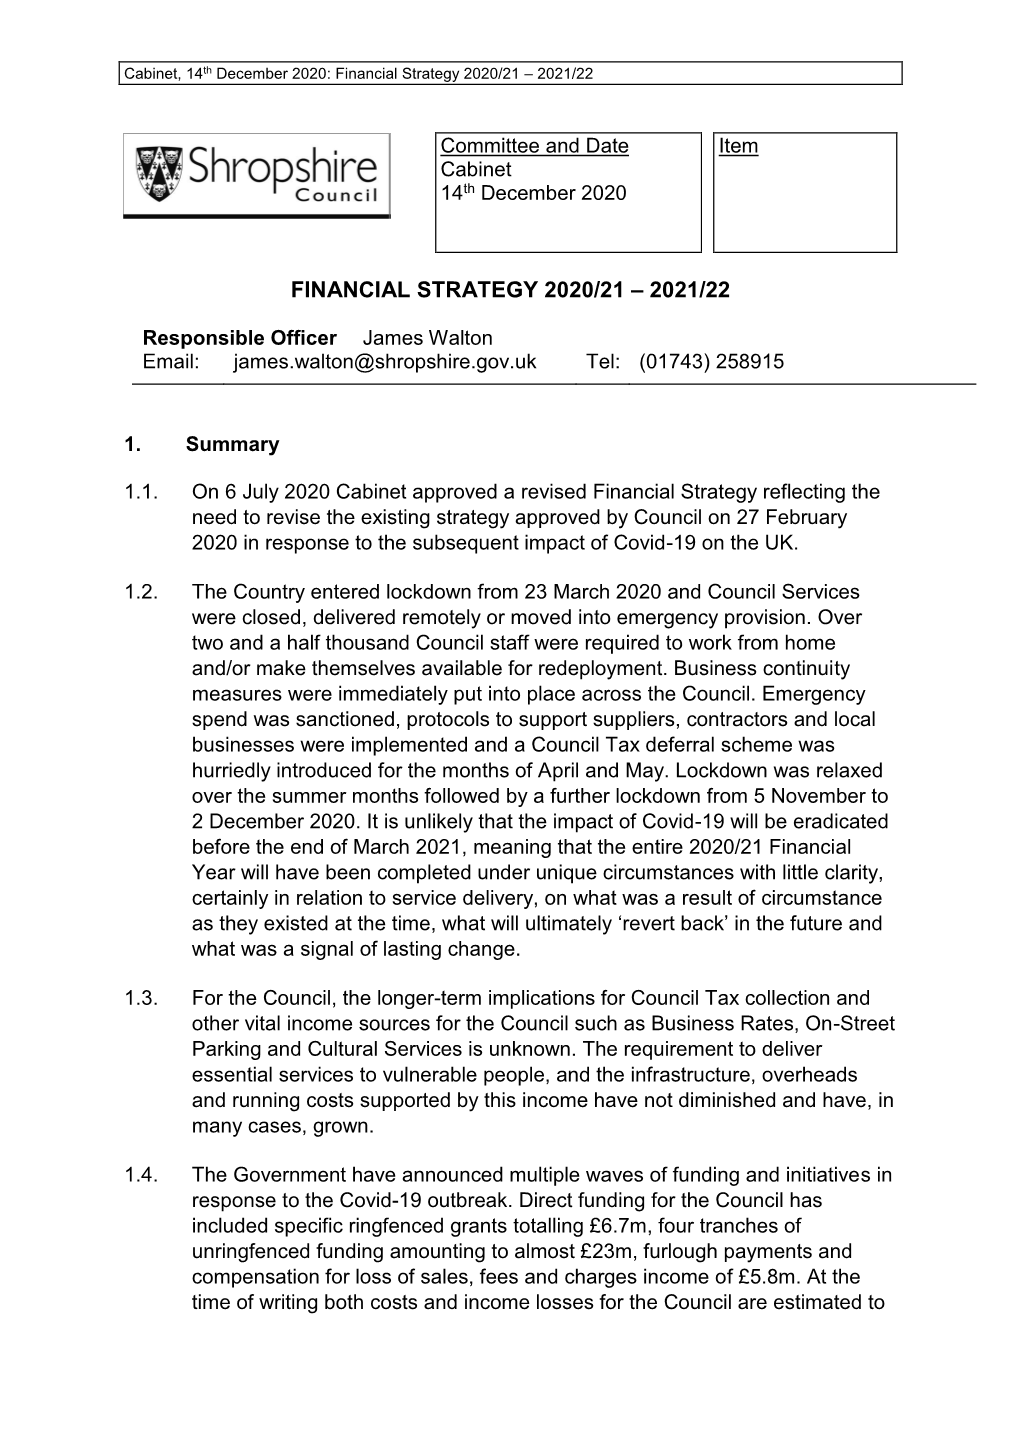 Financial Strategy 2021/22 to 2025/26